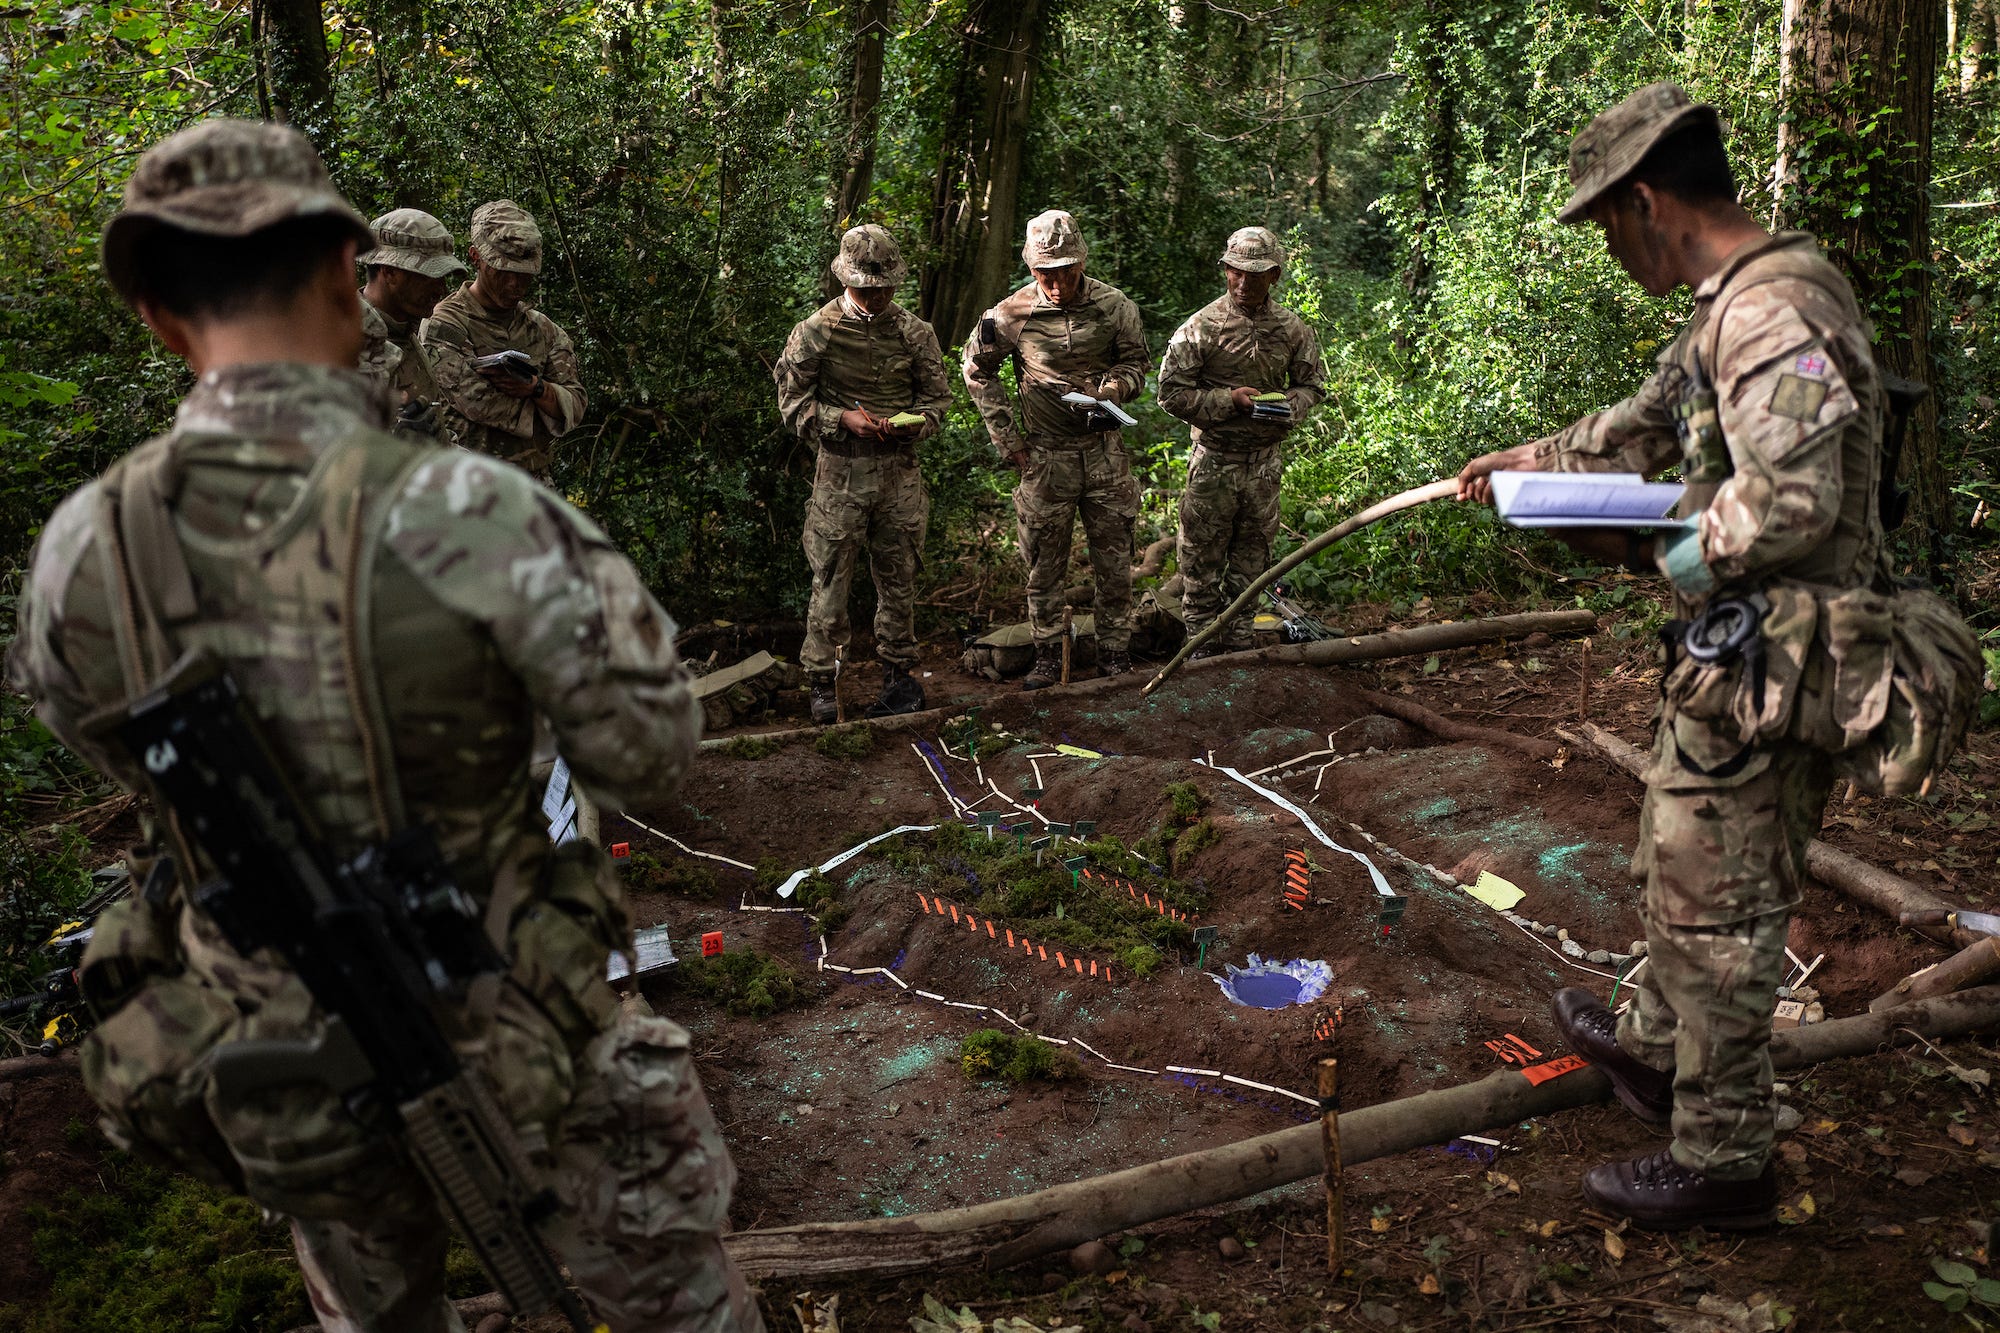 British Gurkhas soldiers in Brecon Beacons National Park